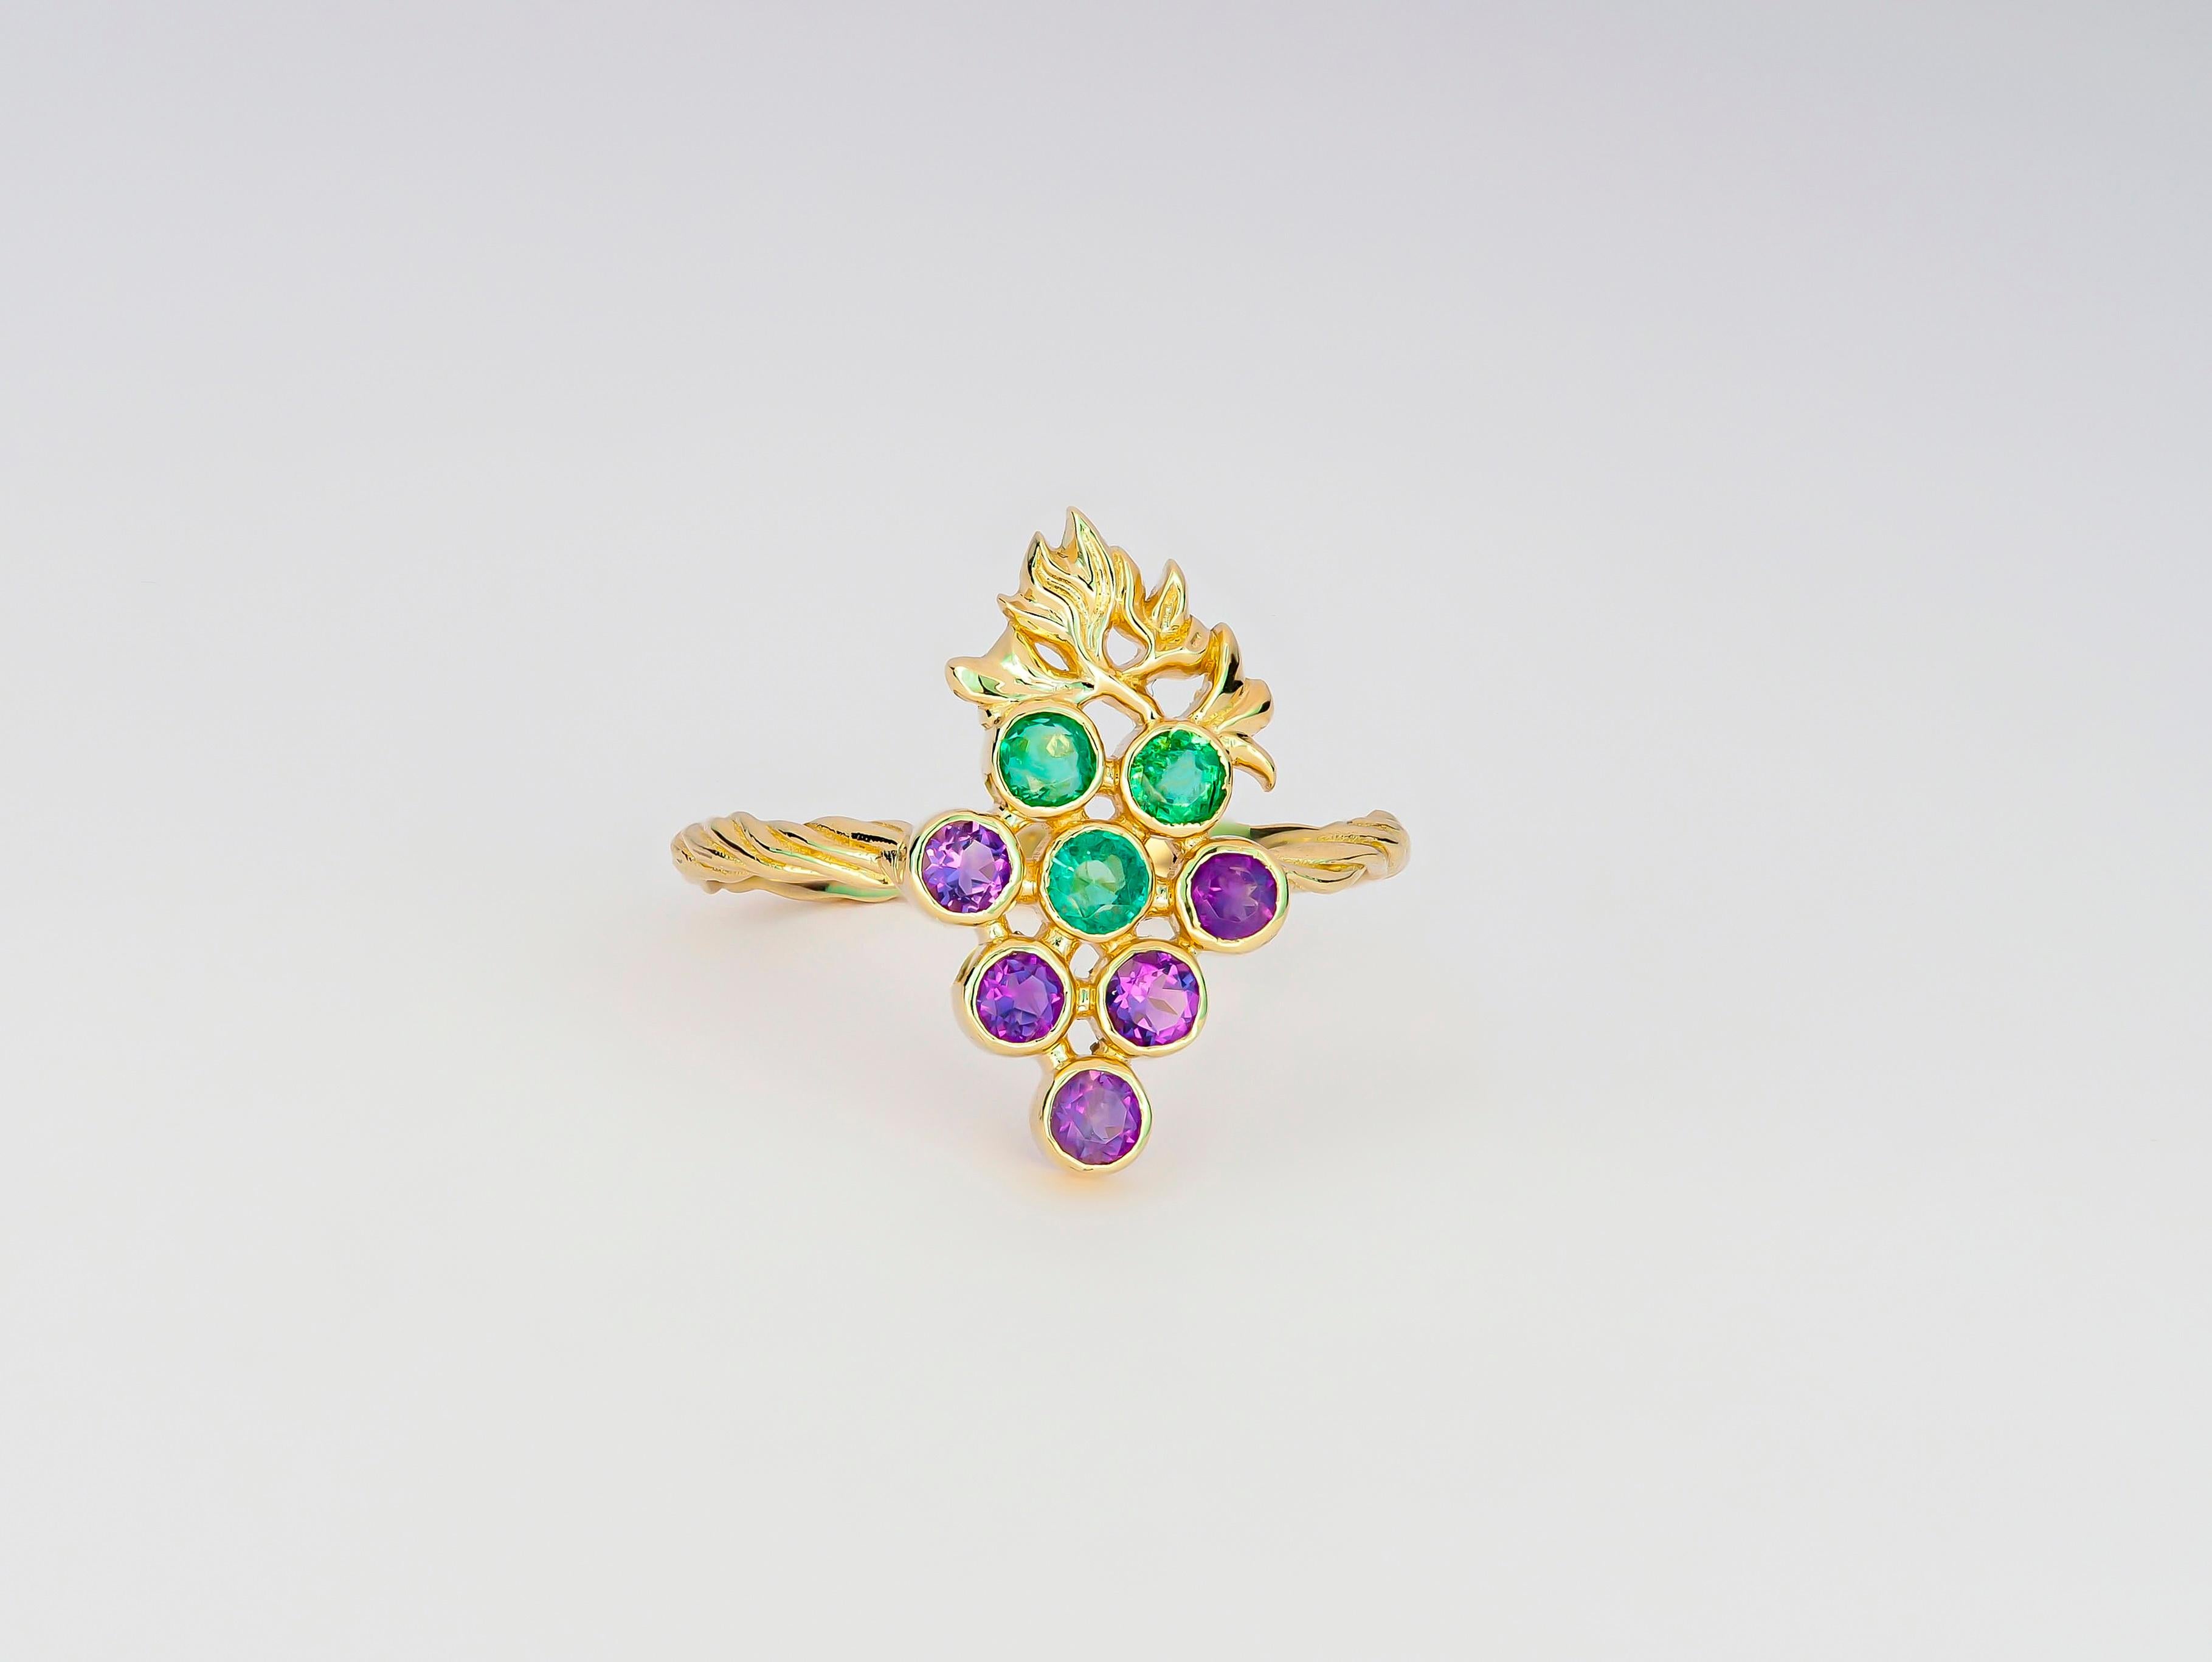 Modern Gold Ring and Earrings with Emeralds and Amethysts